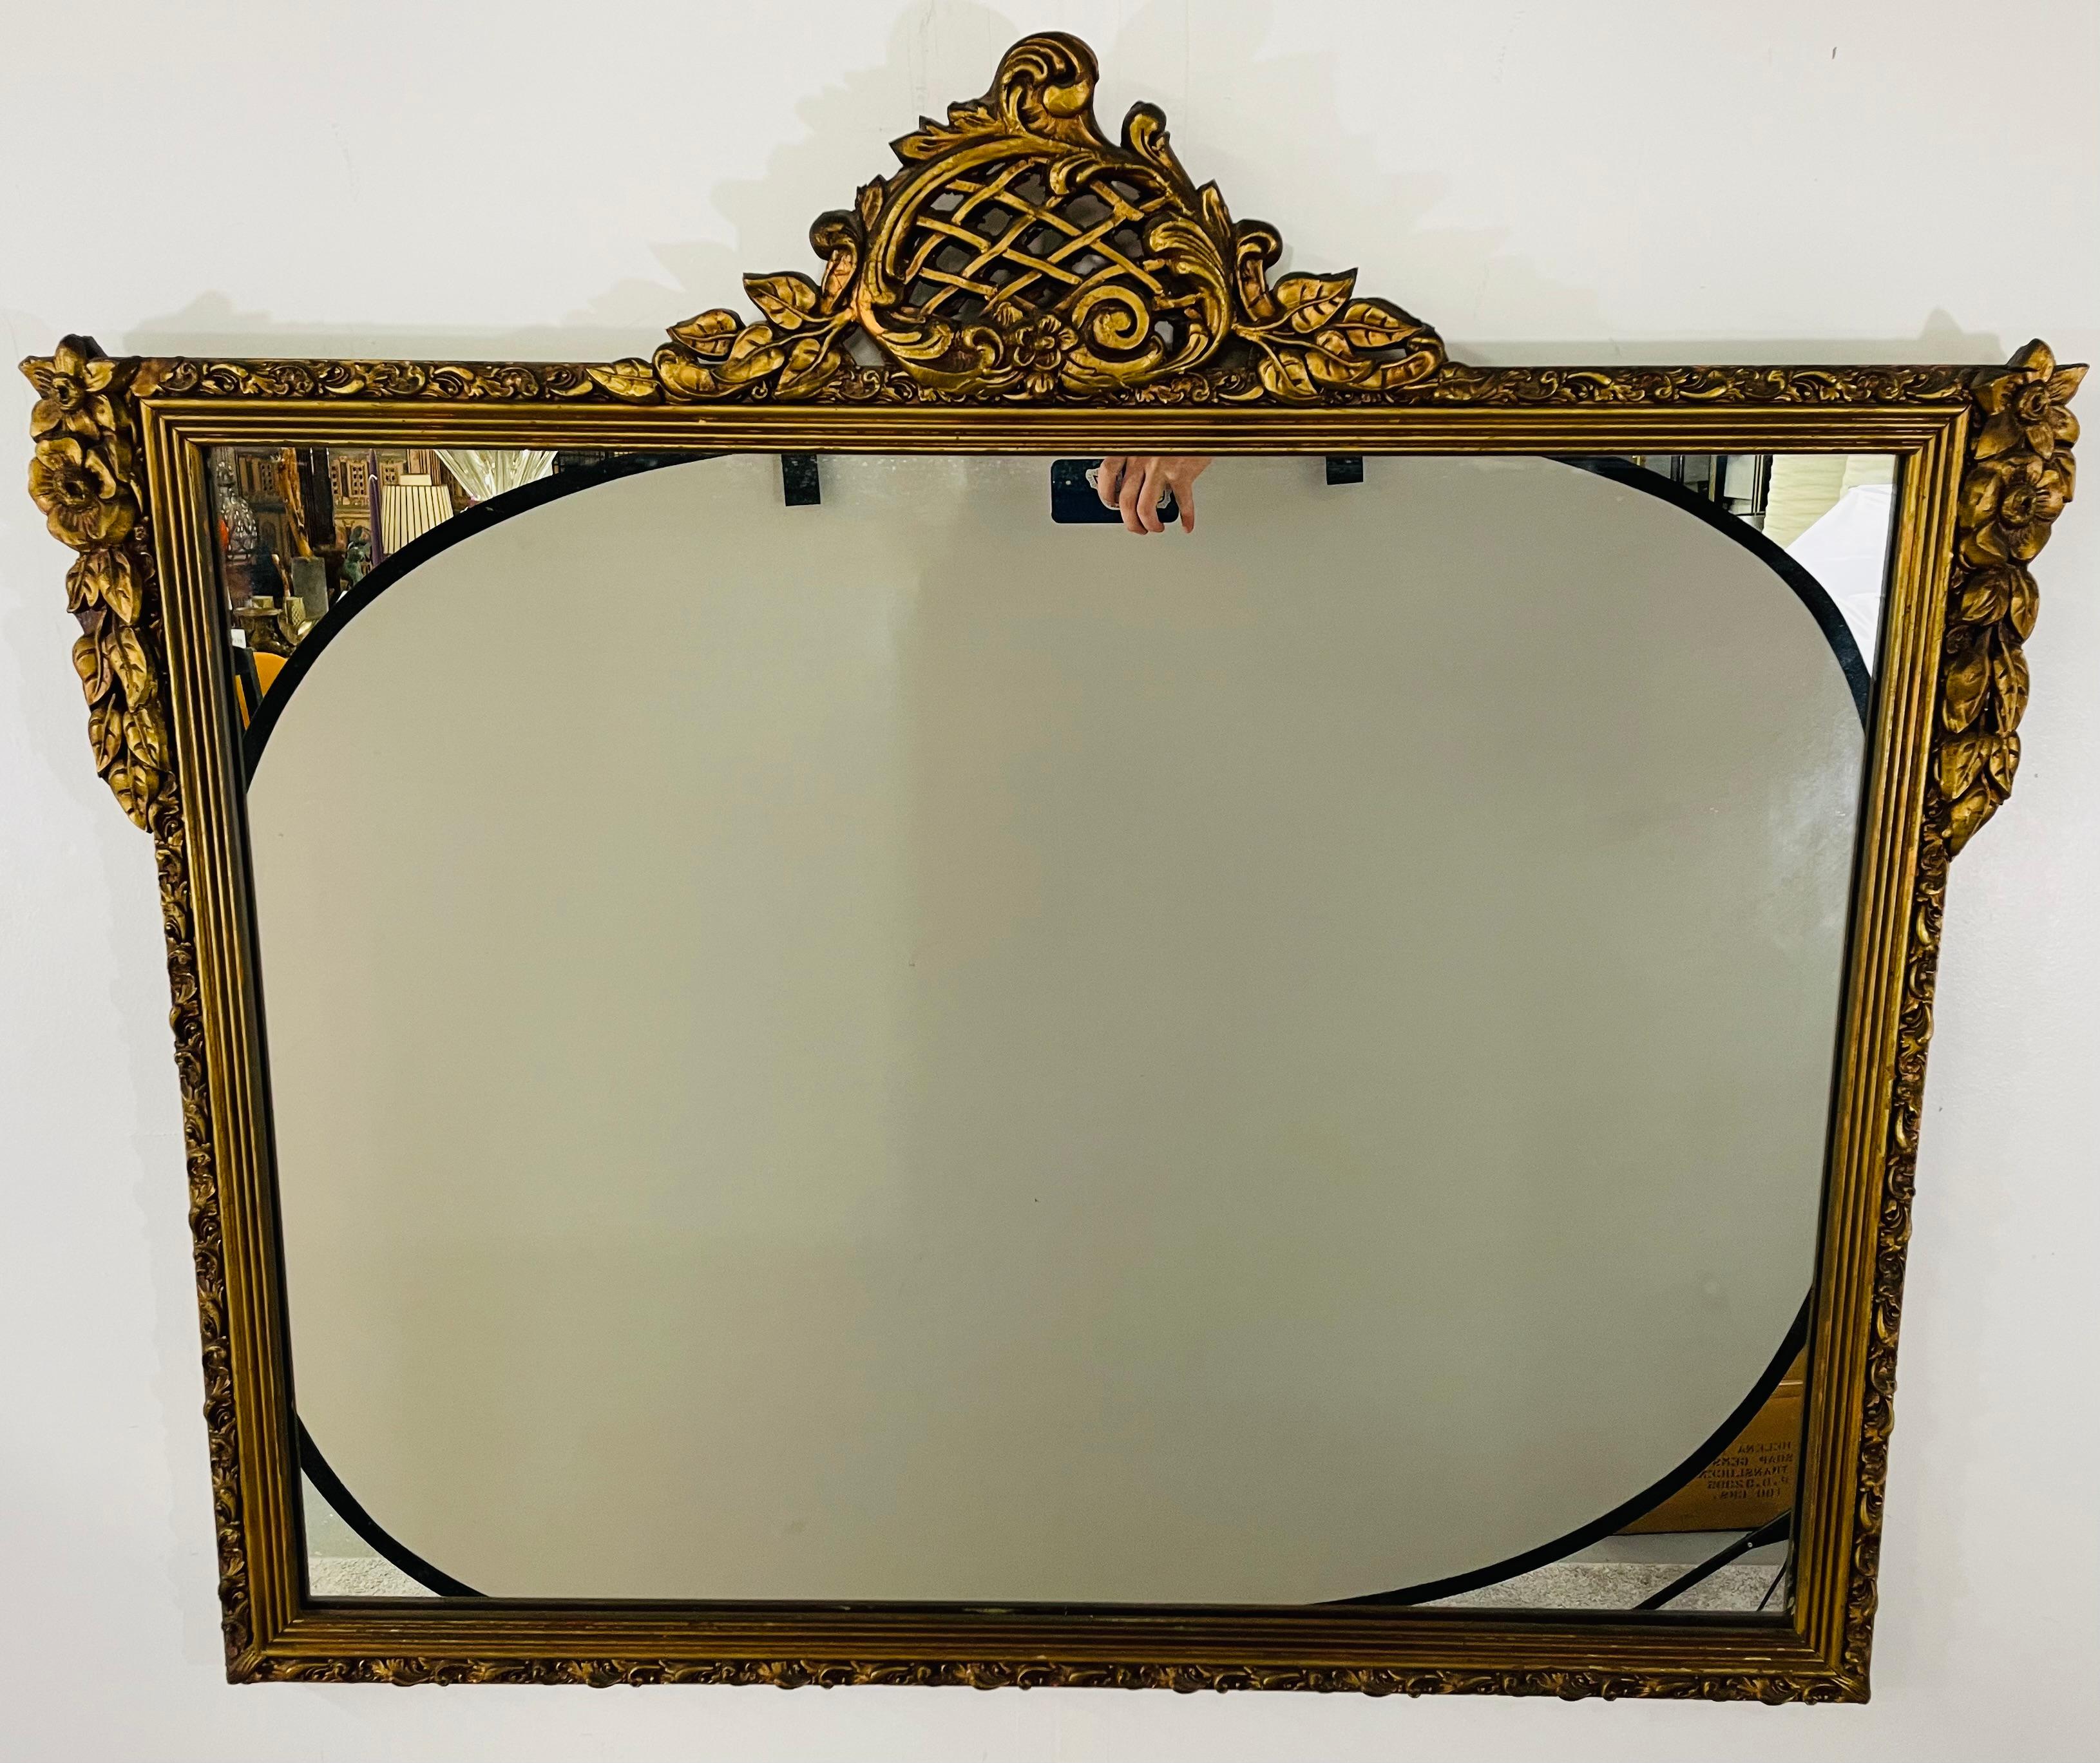 An exquisite 19th century French Louis XVI gilded mirror. The rectangular mirror is embellished with a magnificent crown featuring scrolls and leaves. The frame is finely hand carved and decorate with floral motifs on each top corners. The entire